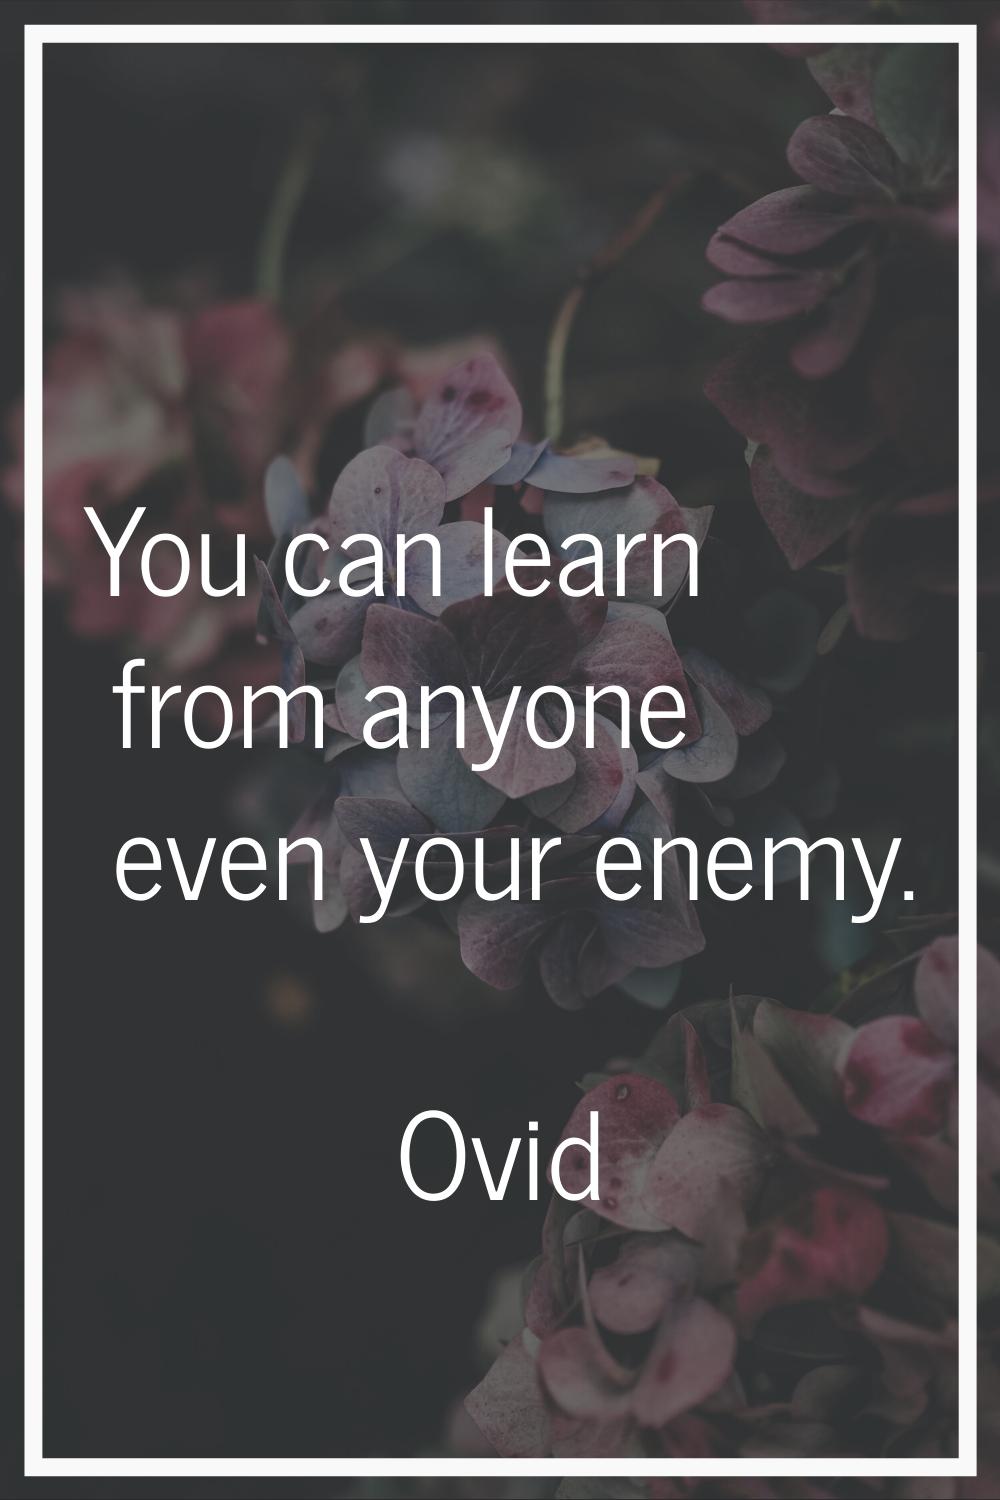 You can learn from anyone even your enemy.